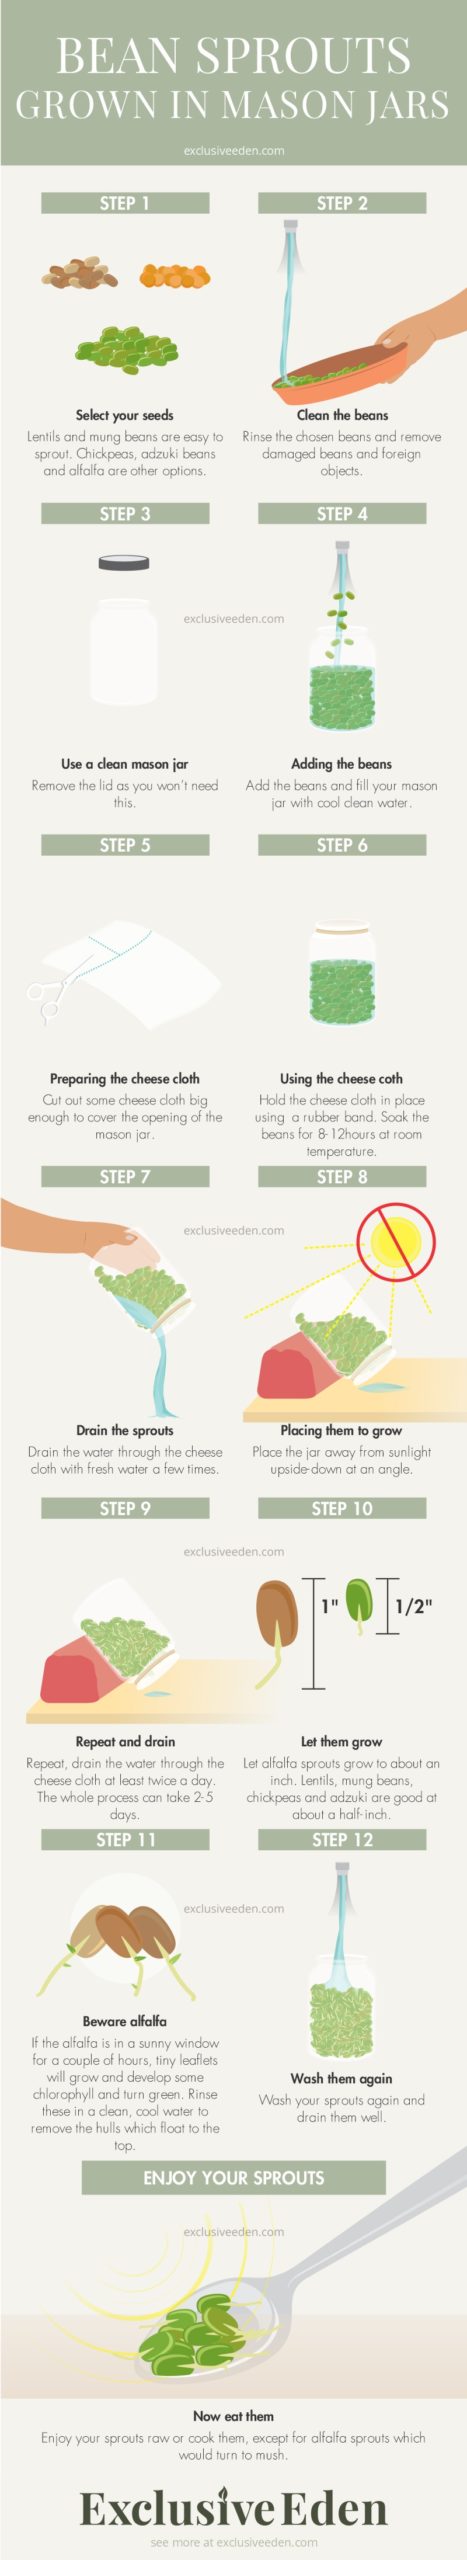 Infographic on growing bean sprouts in a mason jar. A very simple little project to do at home.